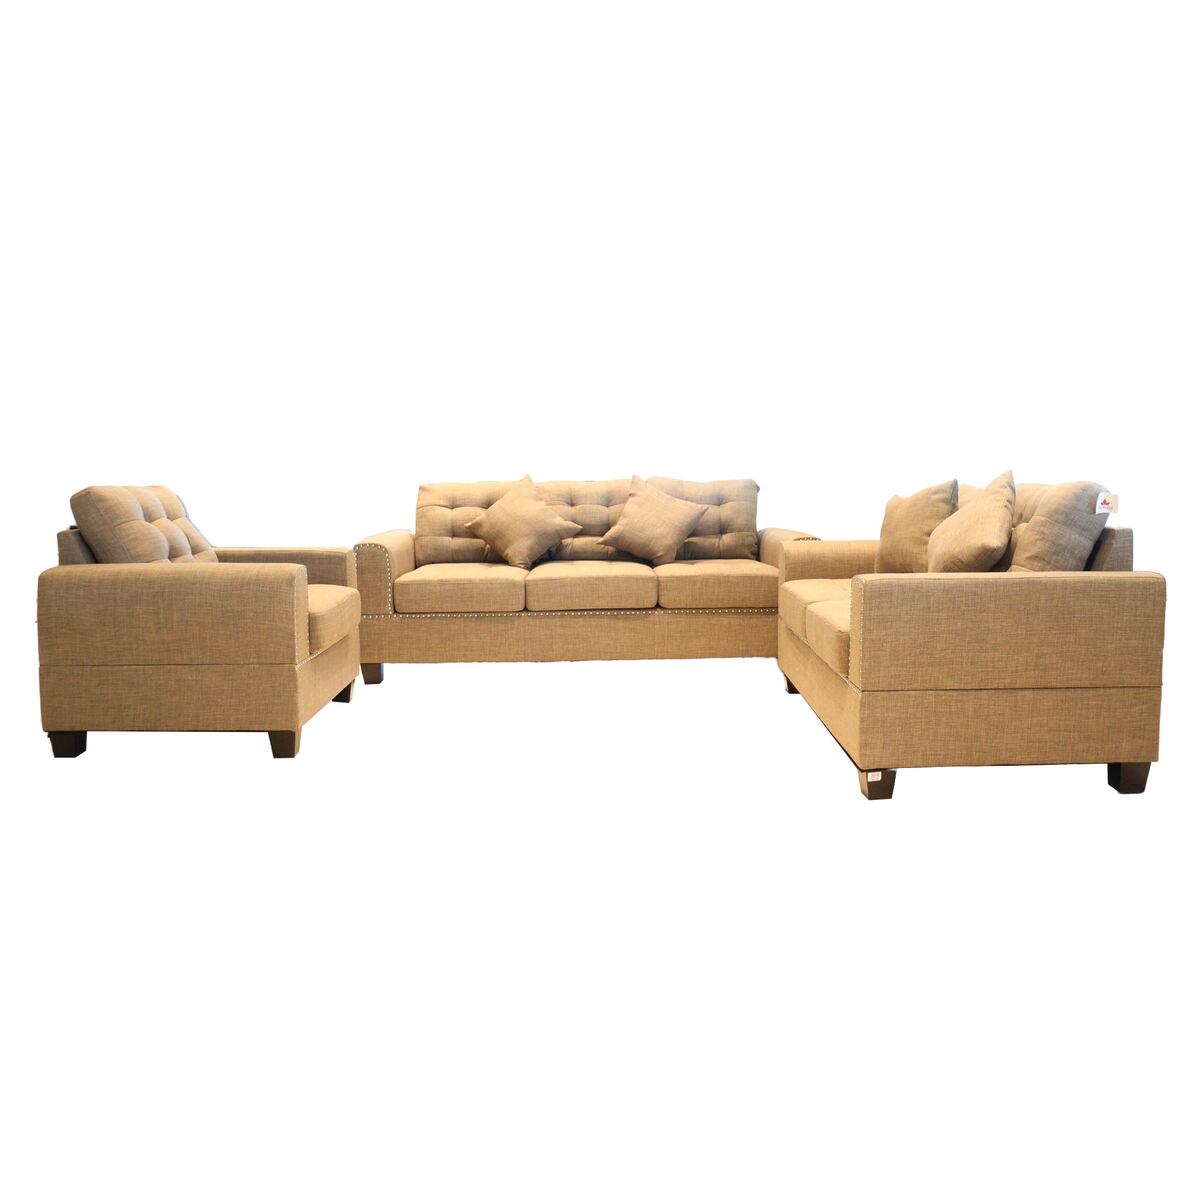 Maple Leaf Sofa Set 3+2+1 MLM111516 Brown,Size 1 Seater Size:85x85x90,2 Seater Size:85x85x145,3 Seater Size:85x85x204. (HxWXL -Cms)